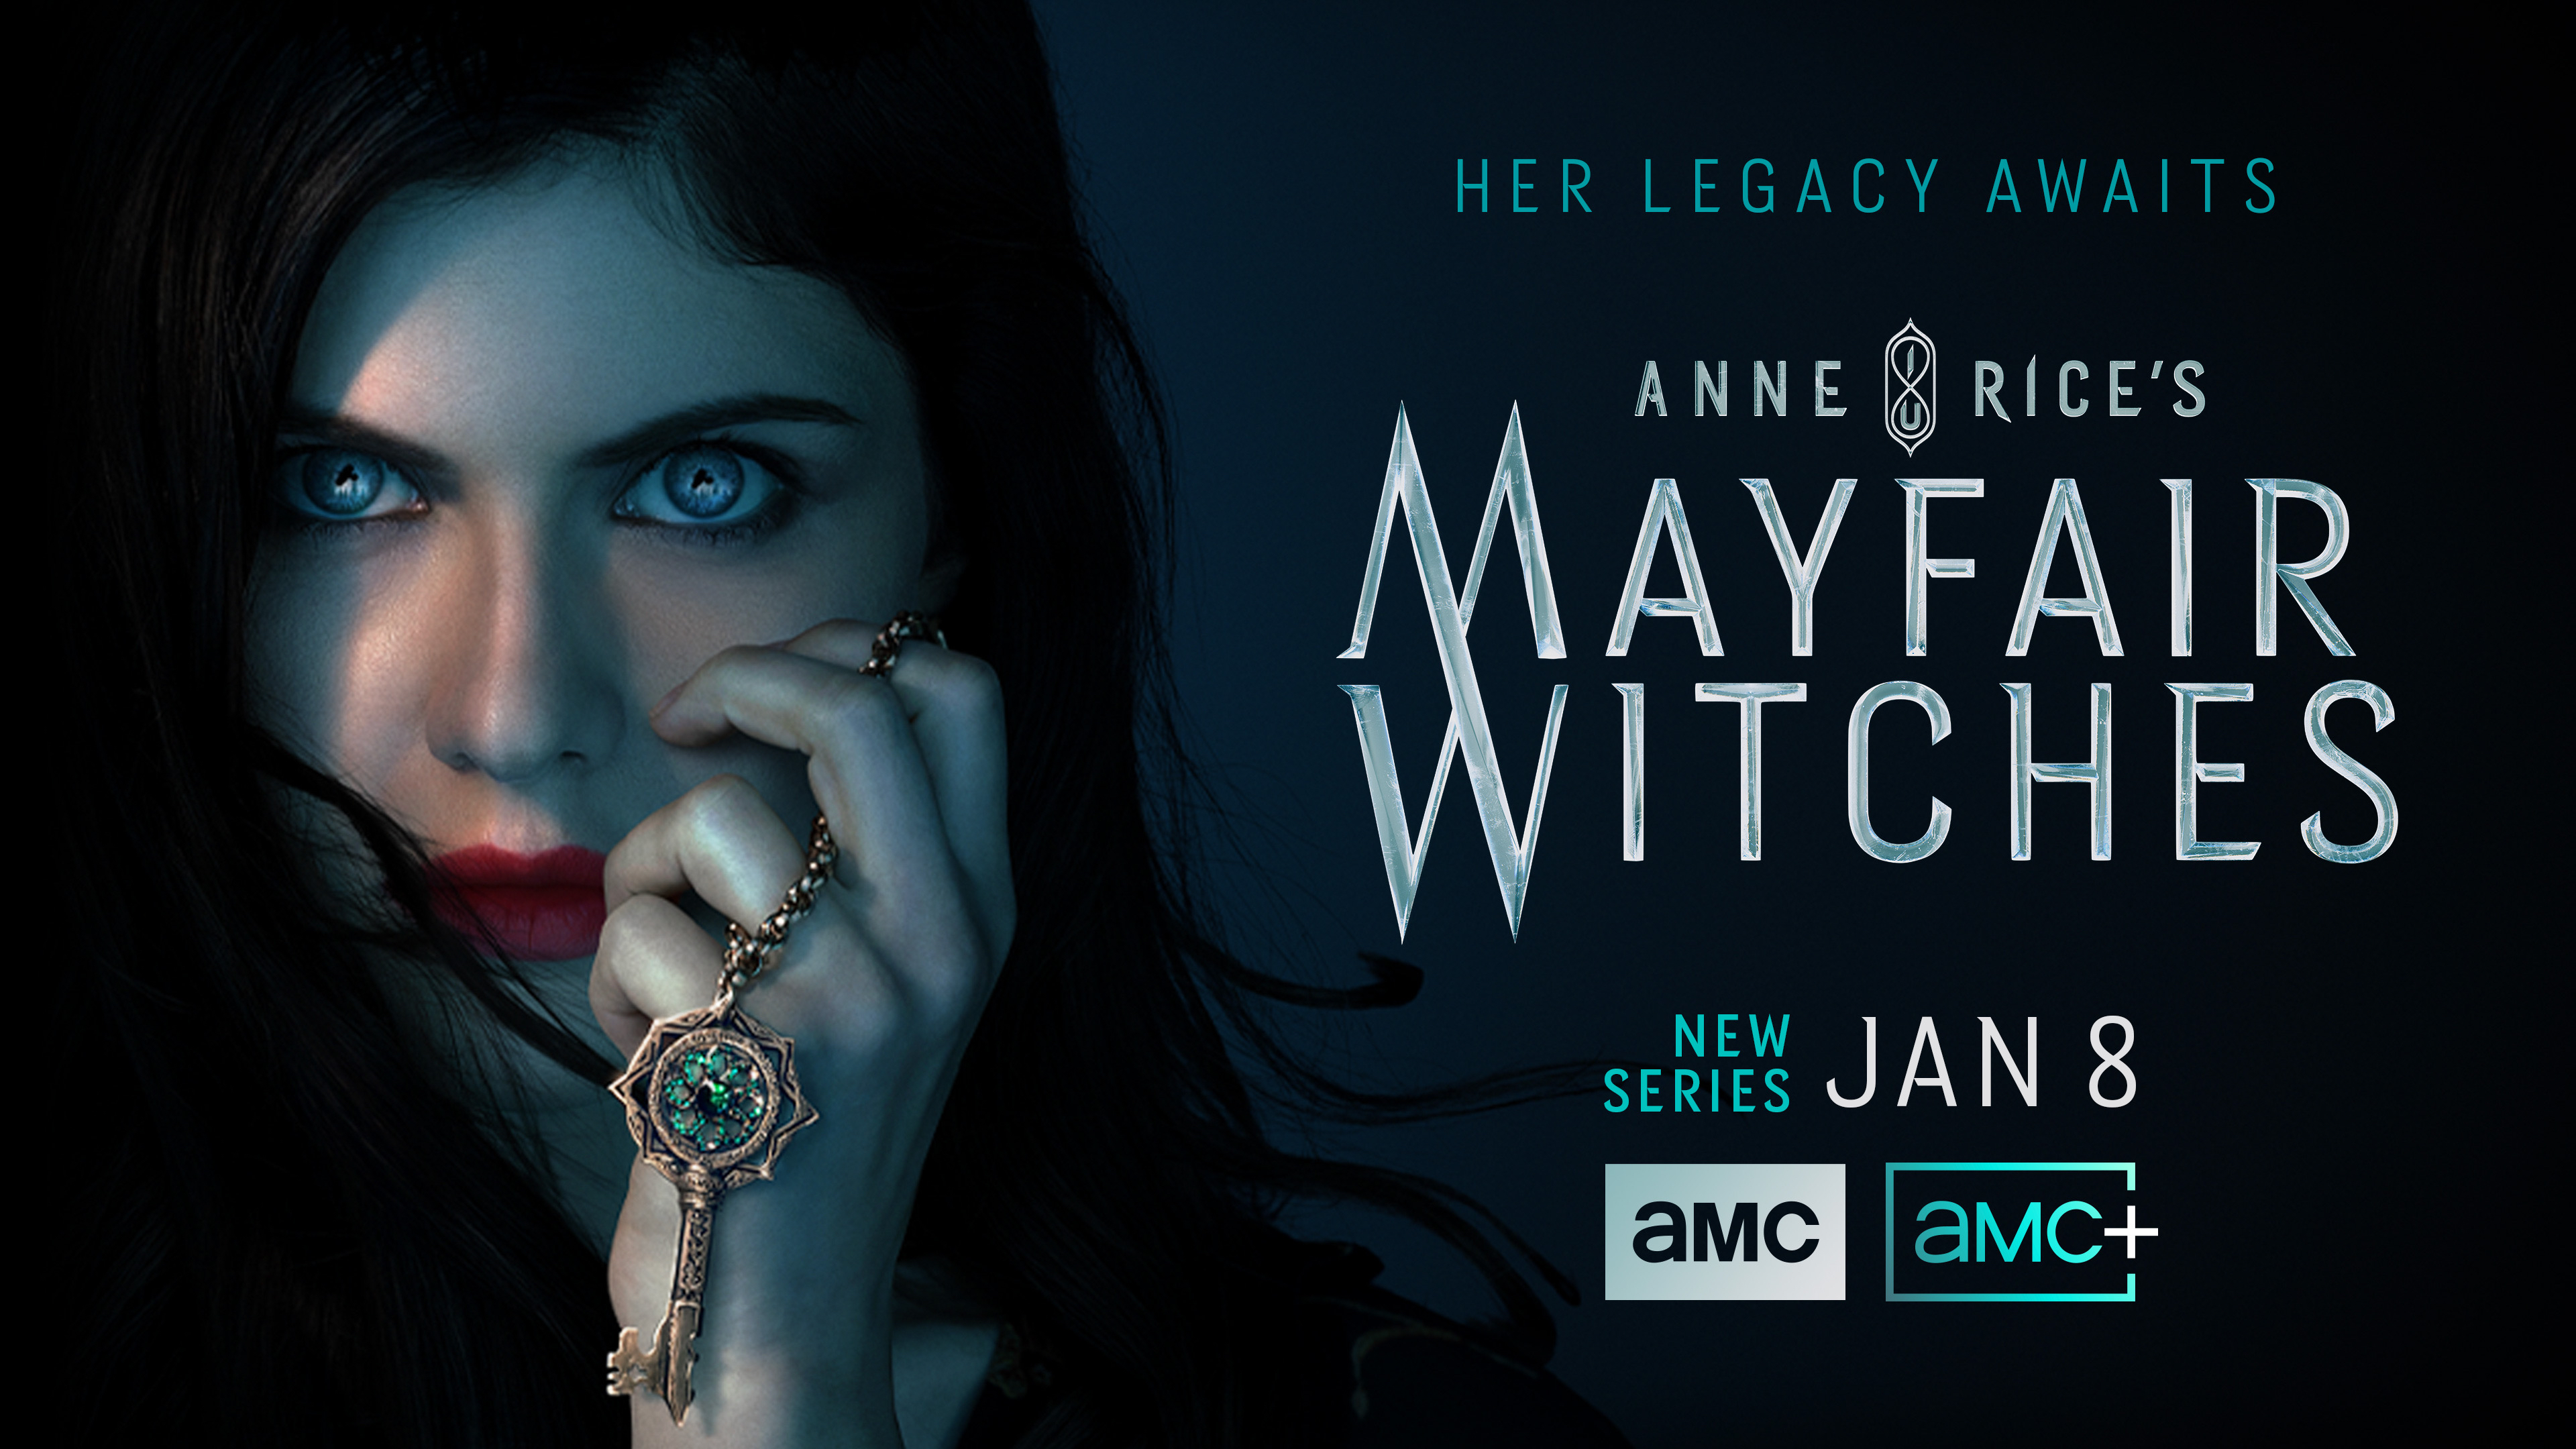 Anne Rice's Mayfair Witches Key art courtesy of AMC